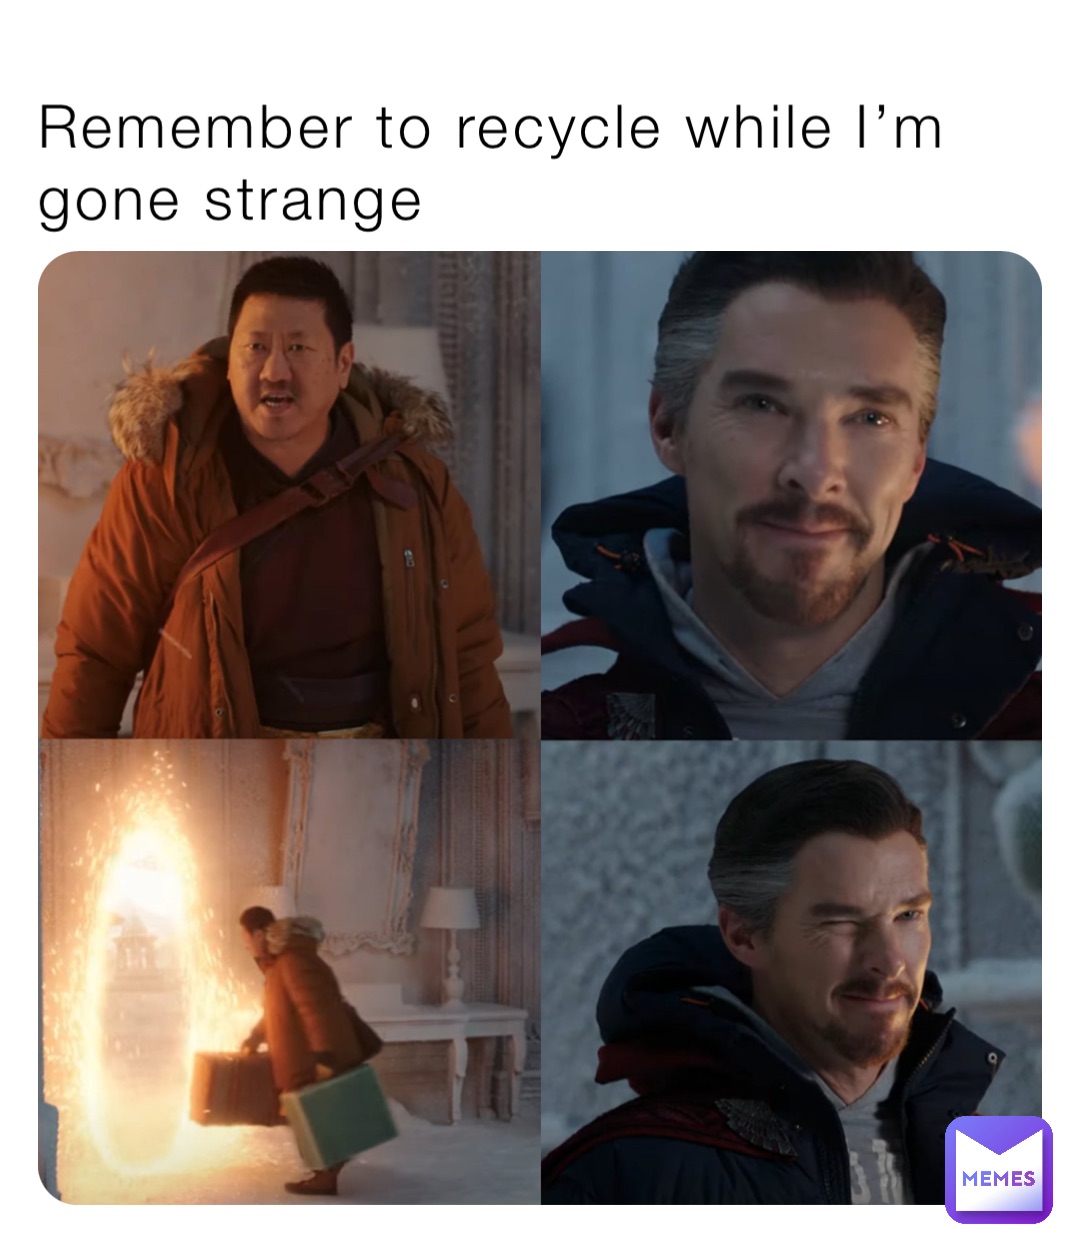 Remember to recycle while I’m gone strange